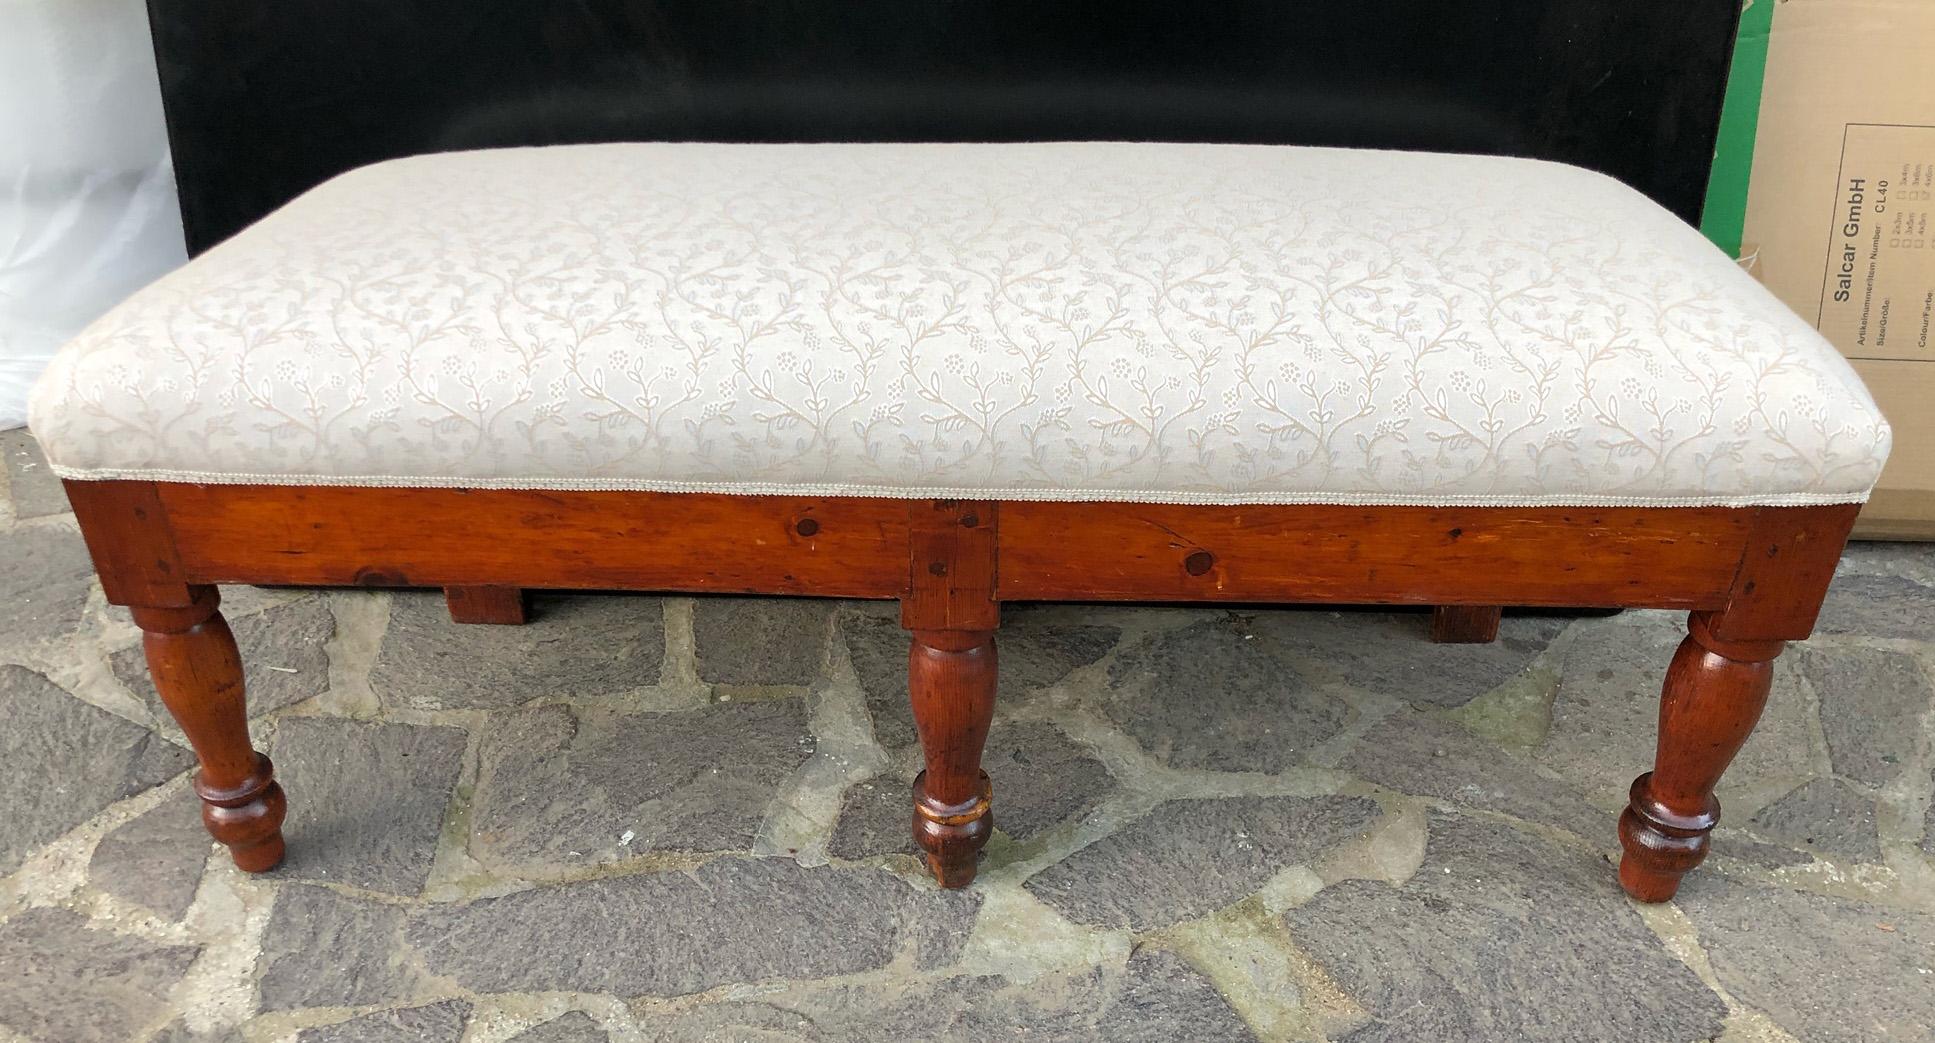 Original 1900 bedroom bench sofa in pine with new upholstery. 
The article used to be in a room at the end of the bed and was used to comfortably wear shoes and clothing.
 Later it was placed at the entrance of an important house in a waiting area